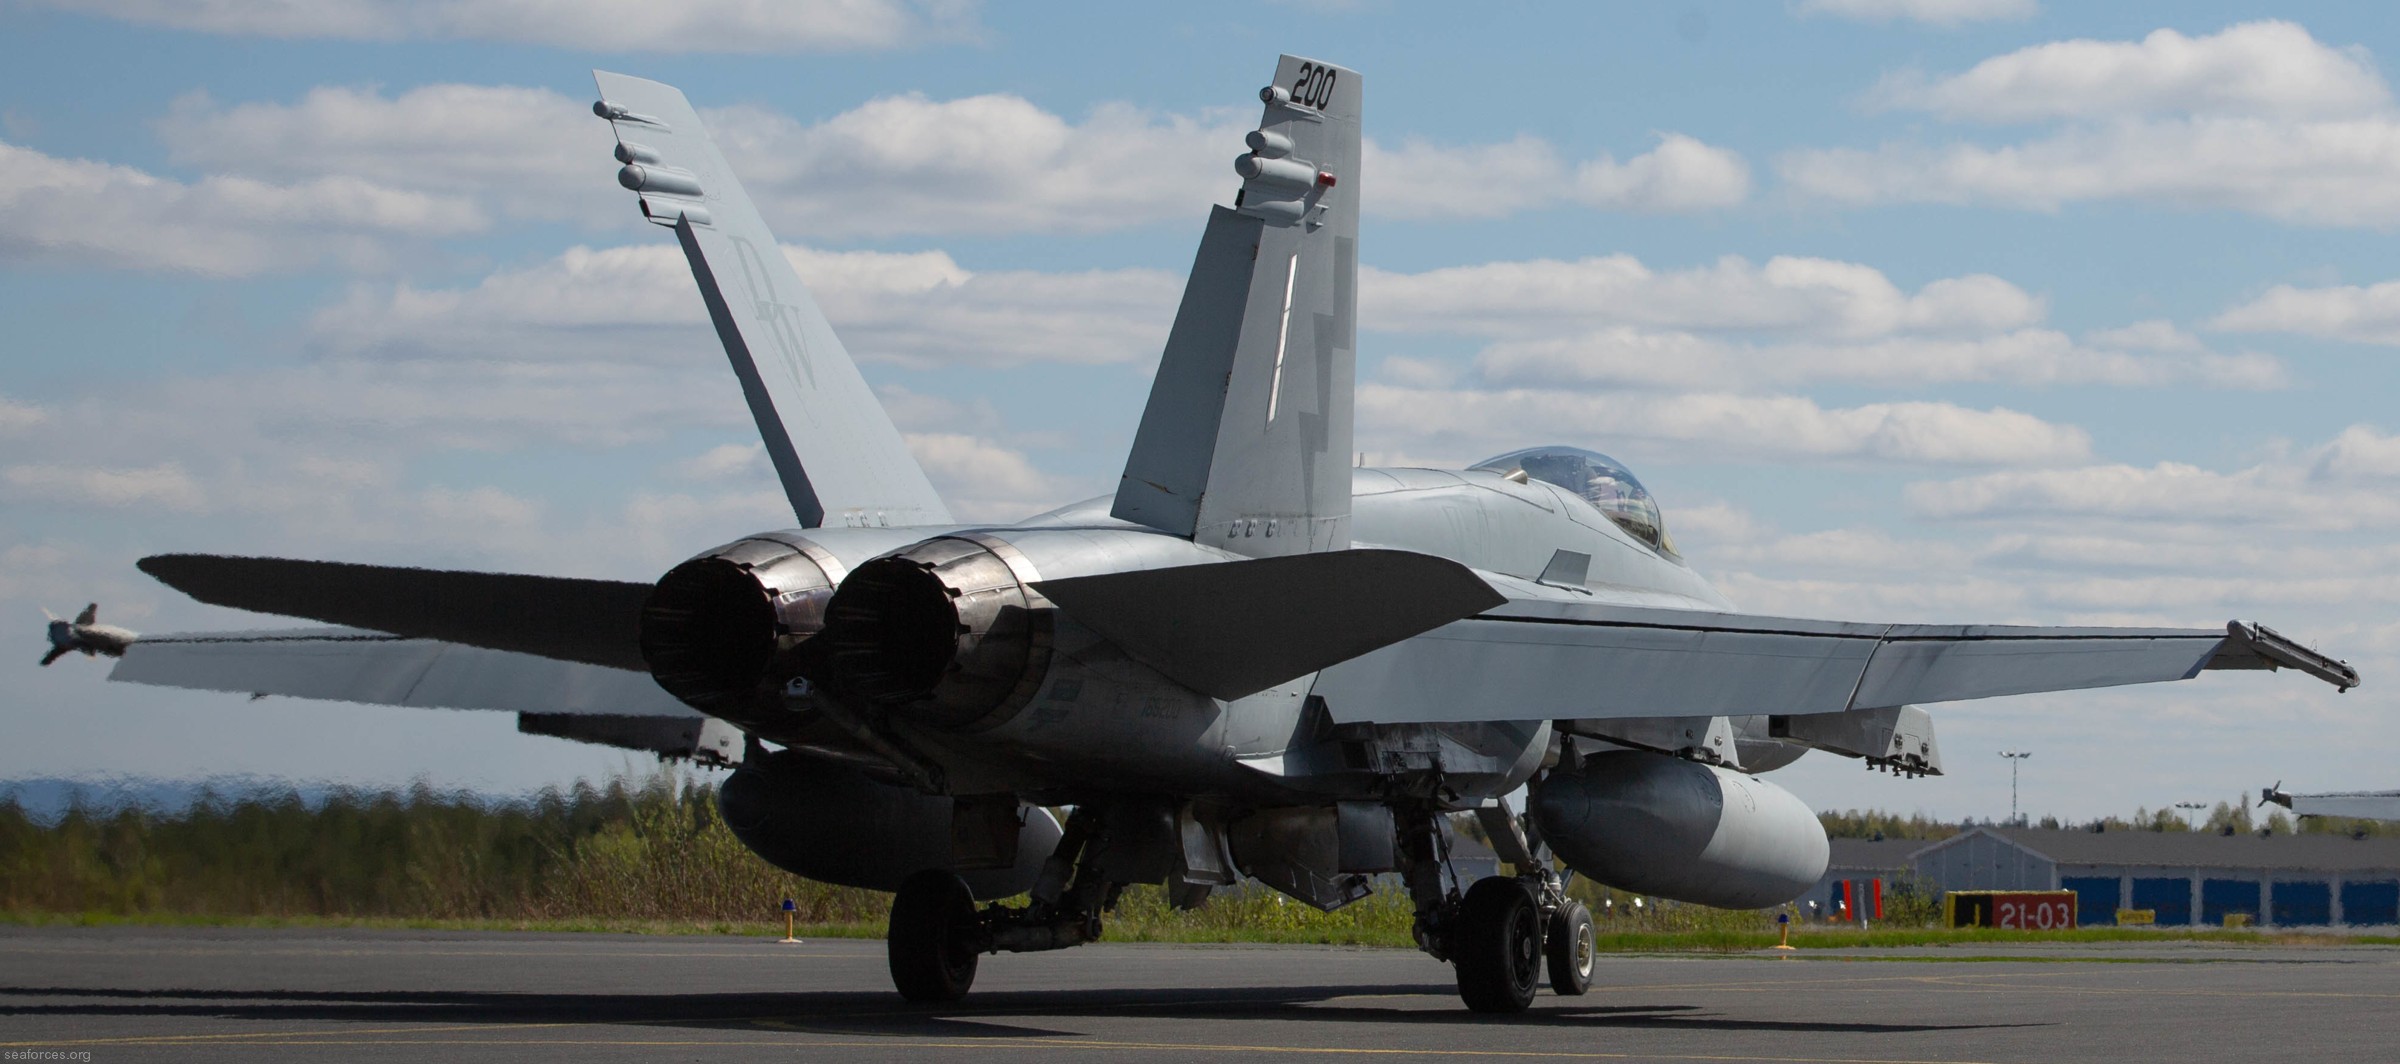 vmfa-251 thunderbolts marine fighter attack squadron f/a-18c hornet 78 exercise arctic challenge 2019